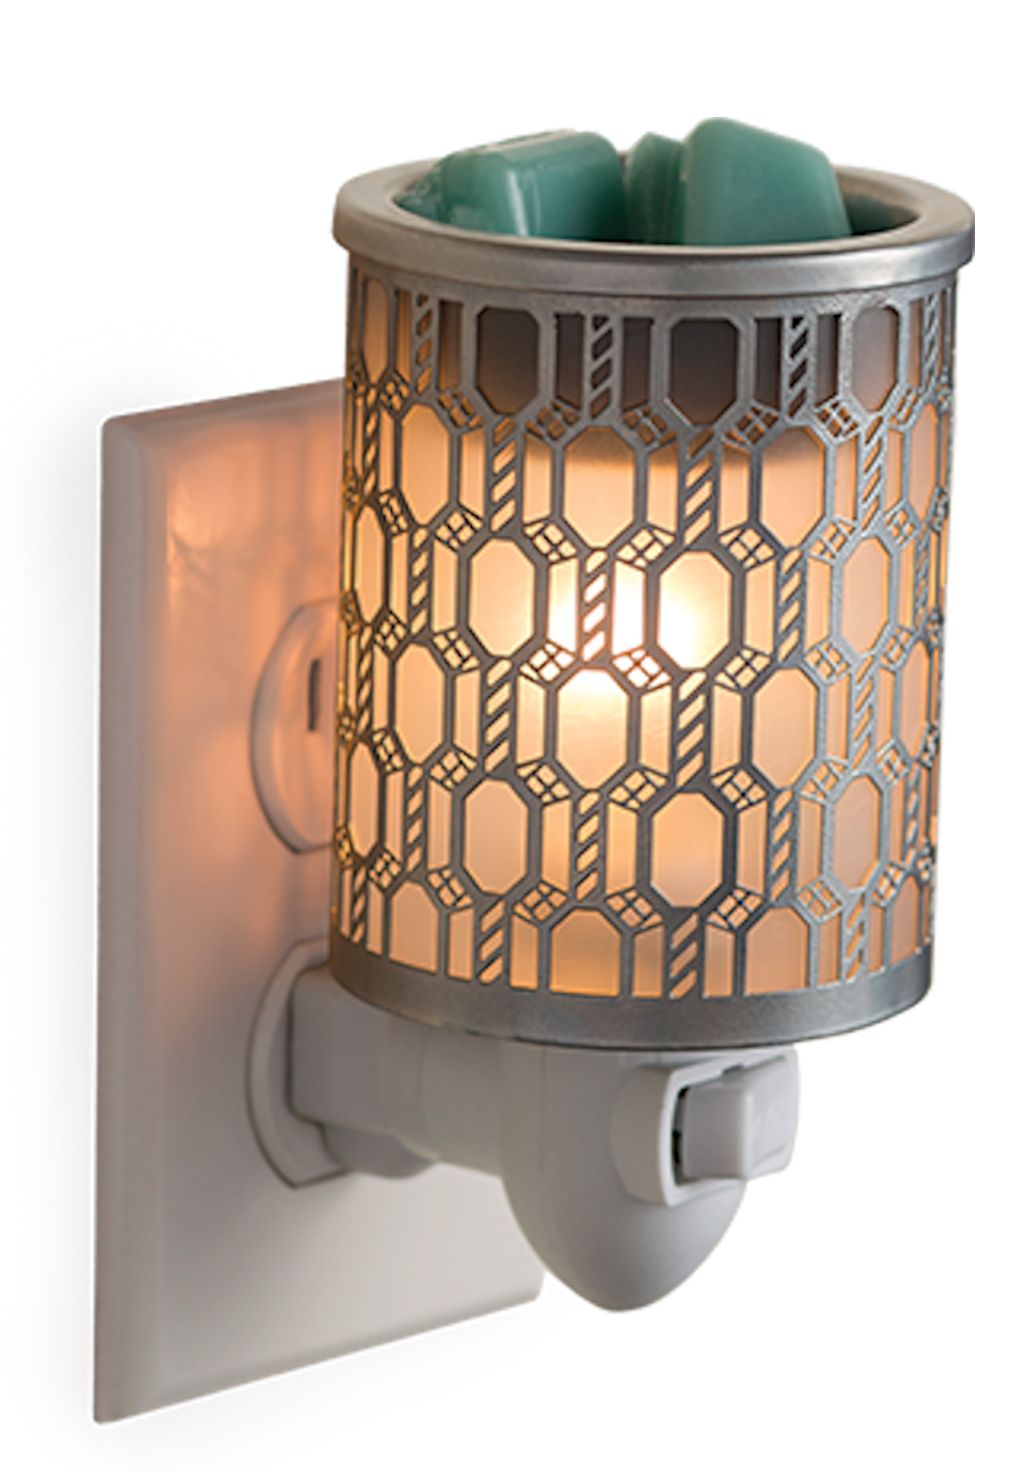 FILIGREE Pluggable Fragrance Warmer by Candle Warmers